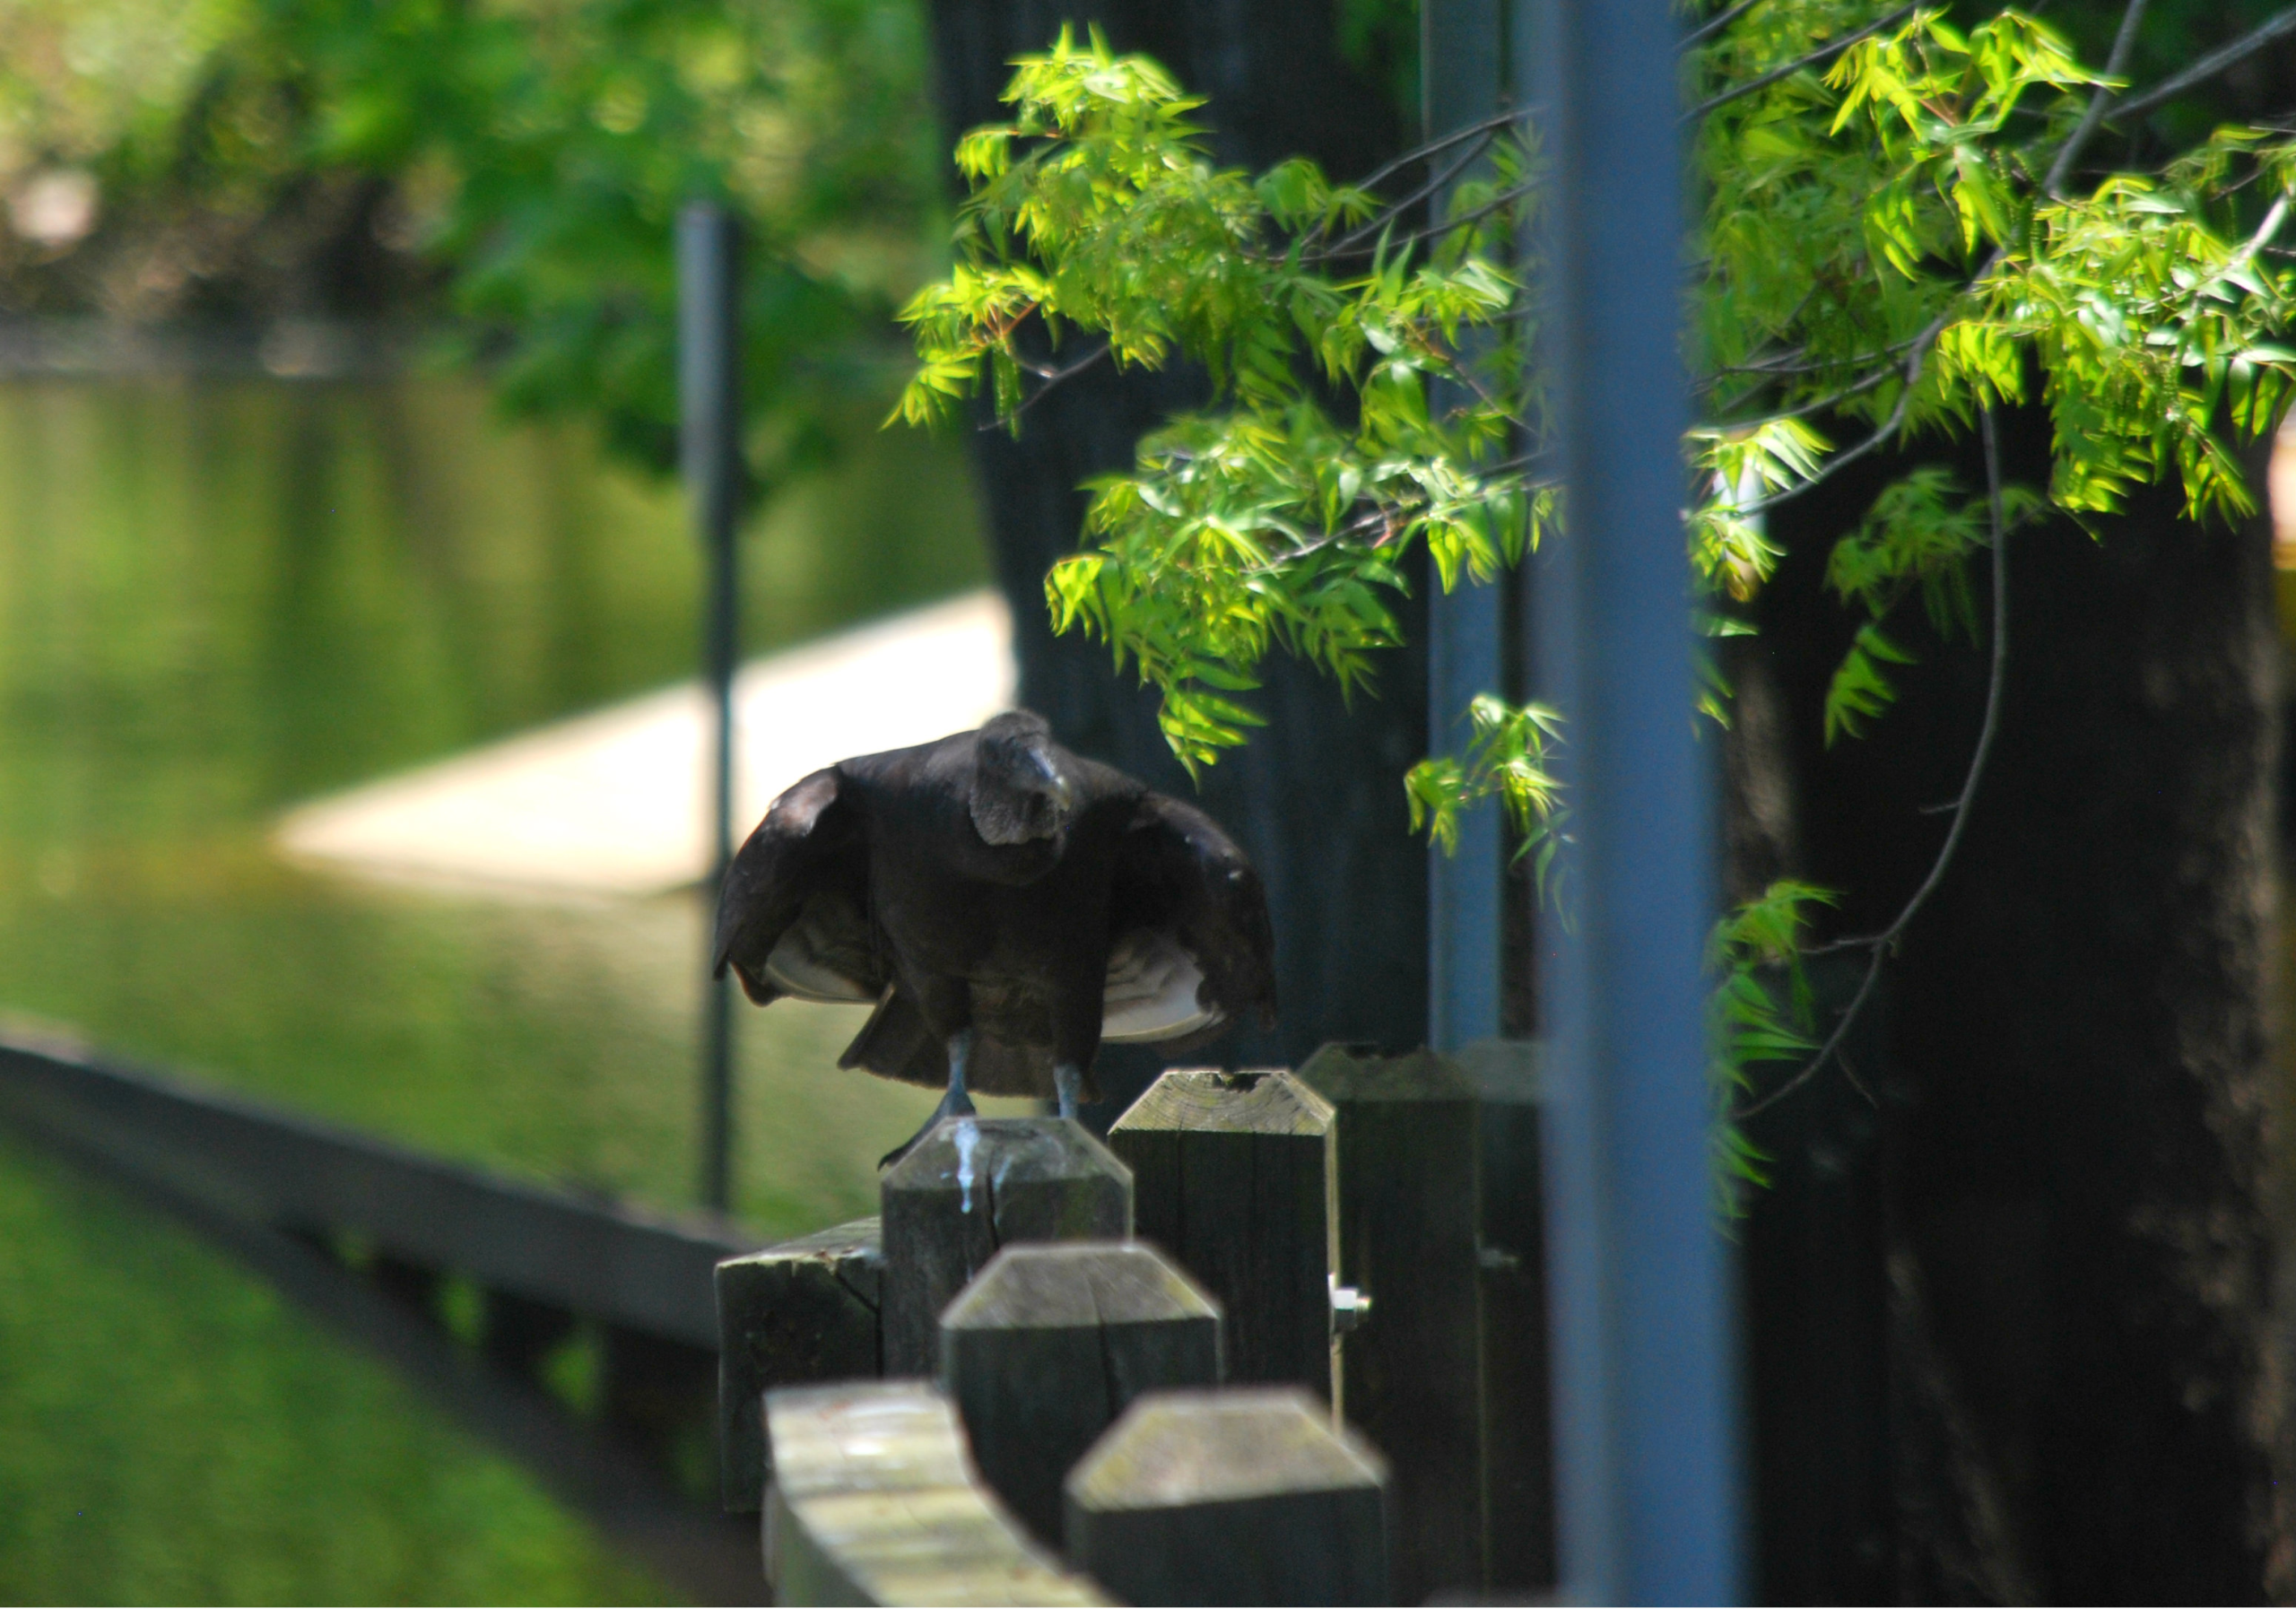 Black Vulture fluffing feathers on the railing.